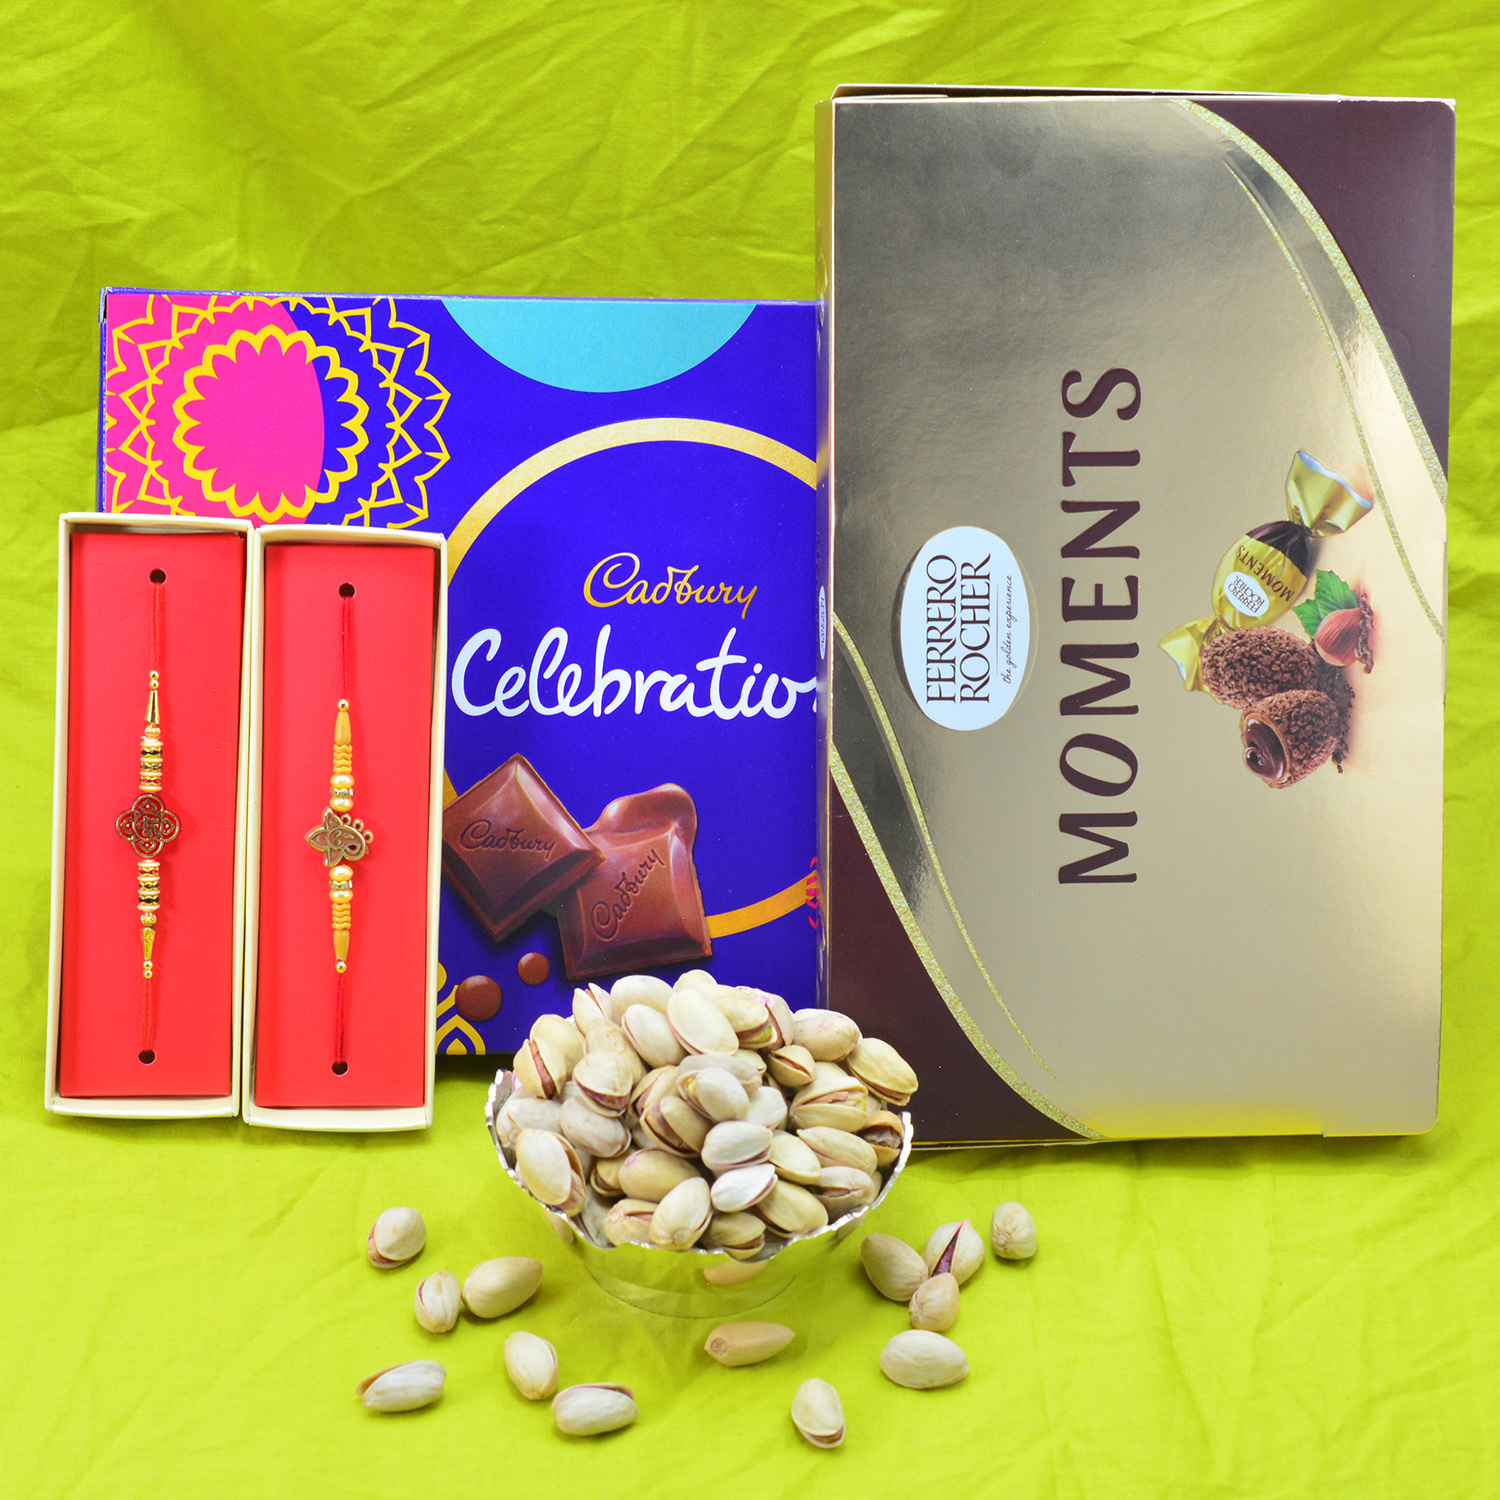 Ferrero Rocher Moments and Cadbury Celebration Hamper with 2 Brother Rakhis and Pista Dry Fruit